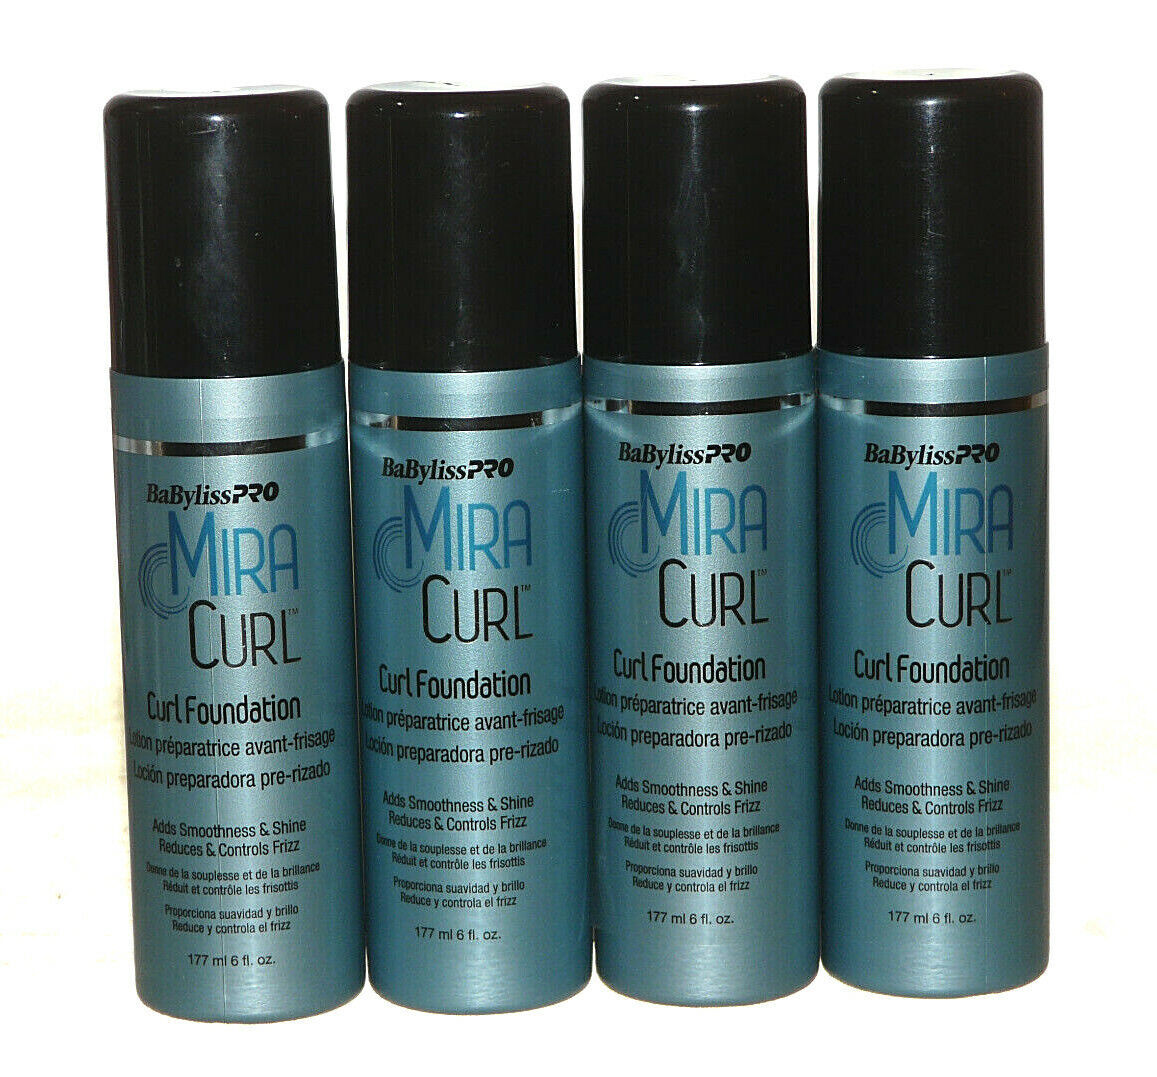 BaByliss PRO Mira Curl Curl Foundation Reduces Frizz 6 Fl Oz  Lot of 4 - $44.43